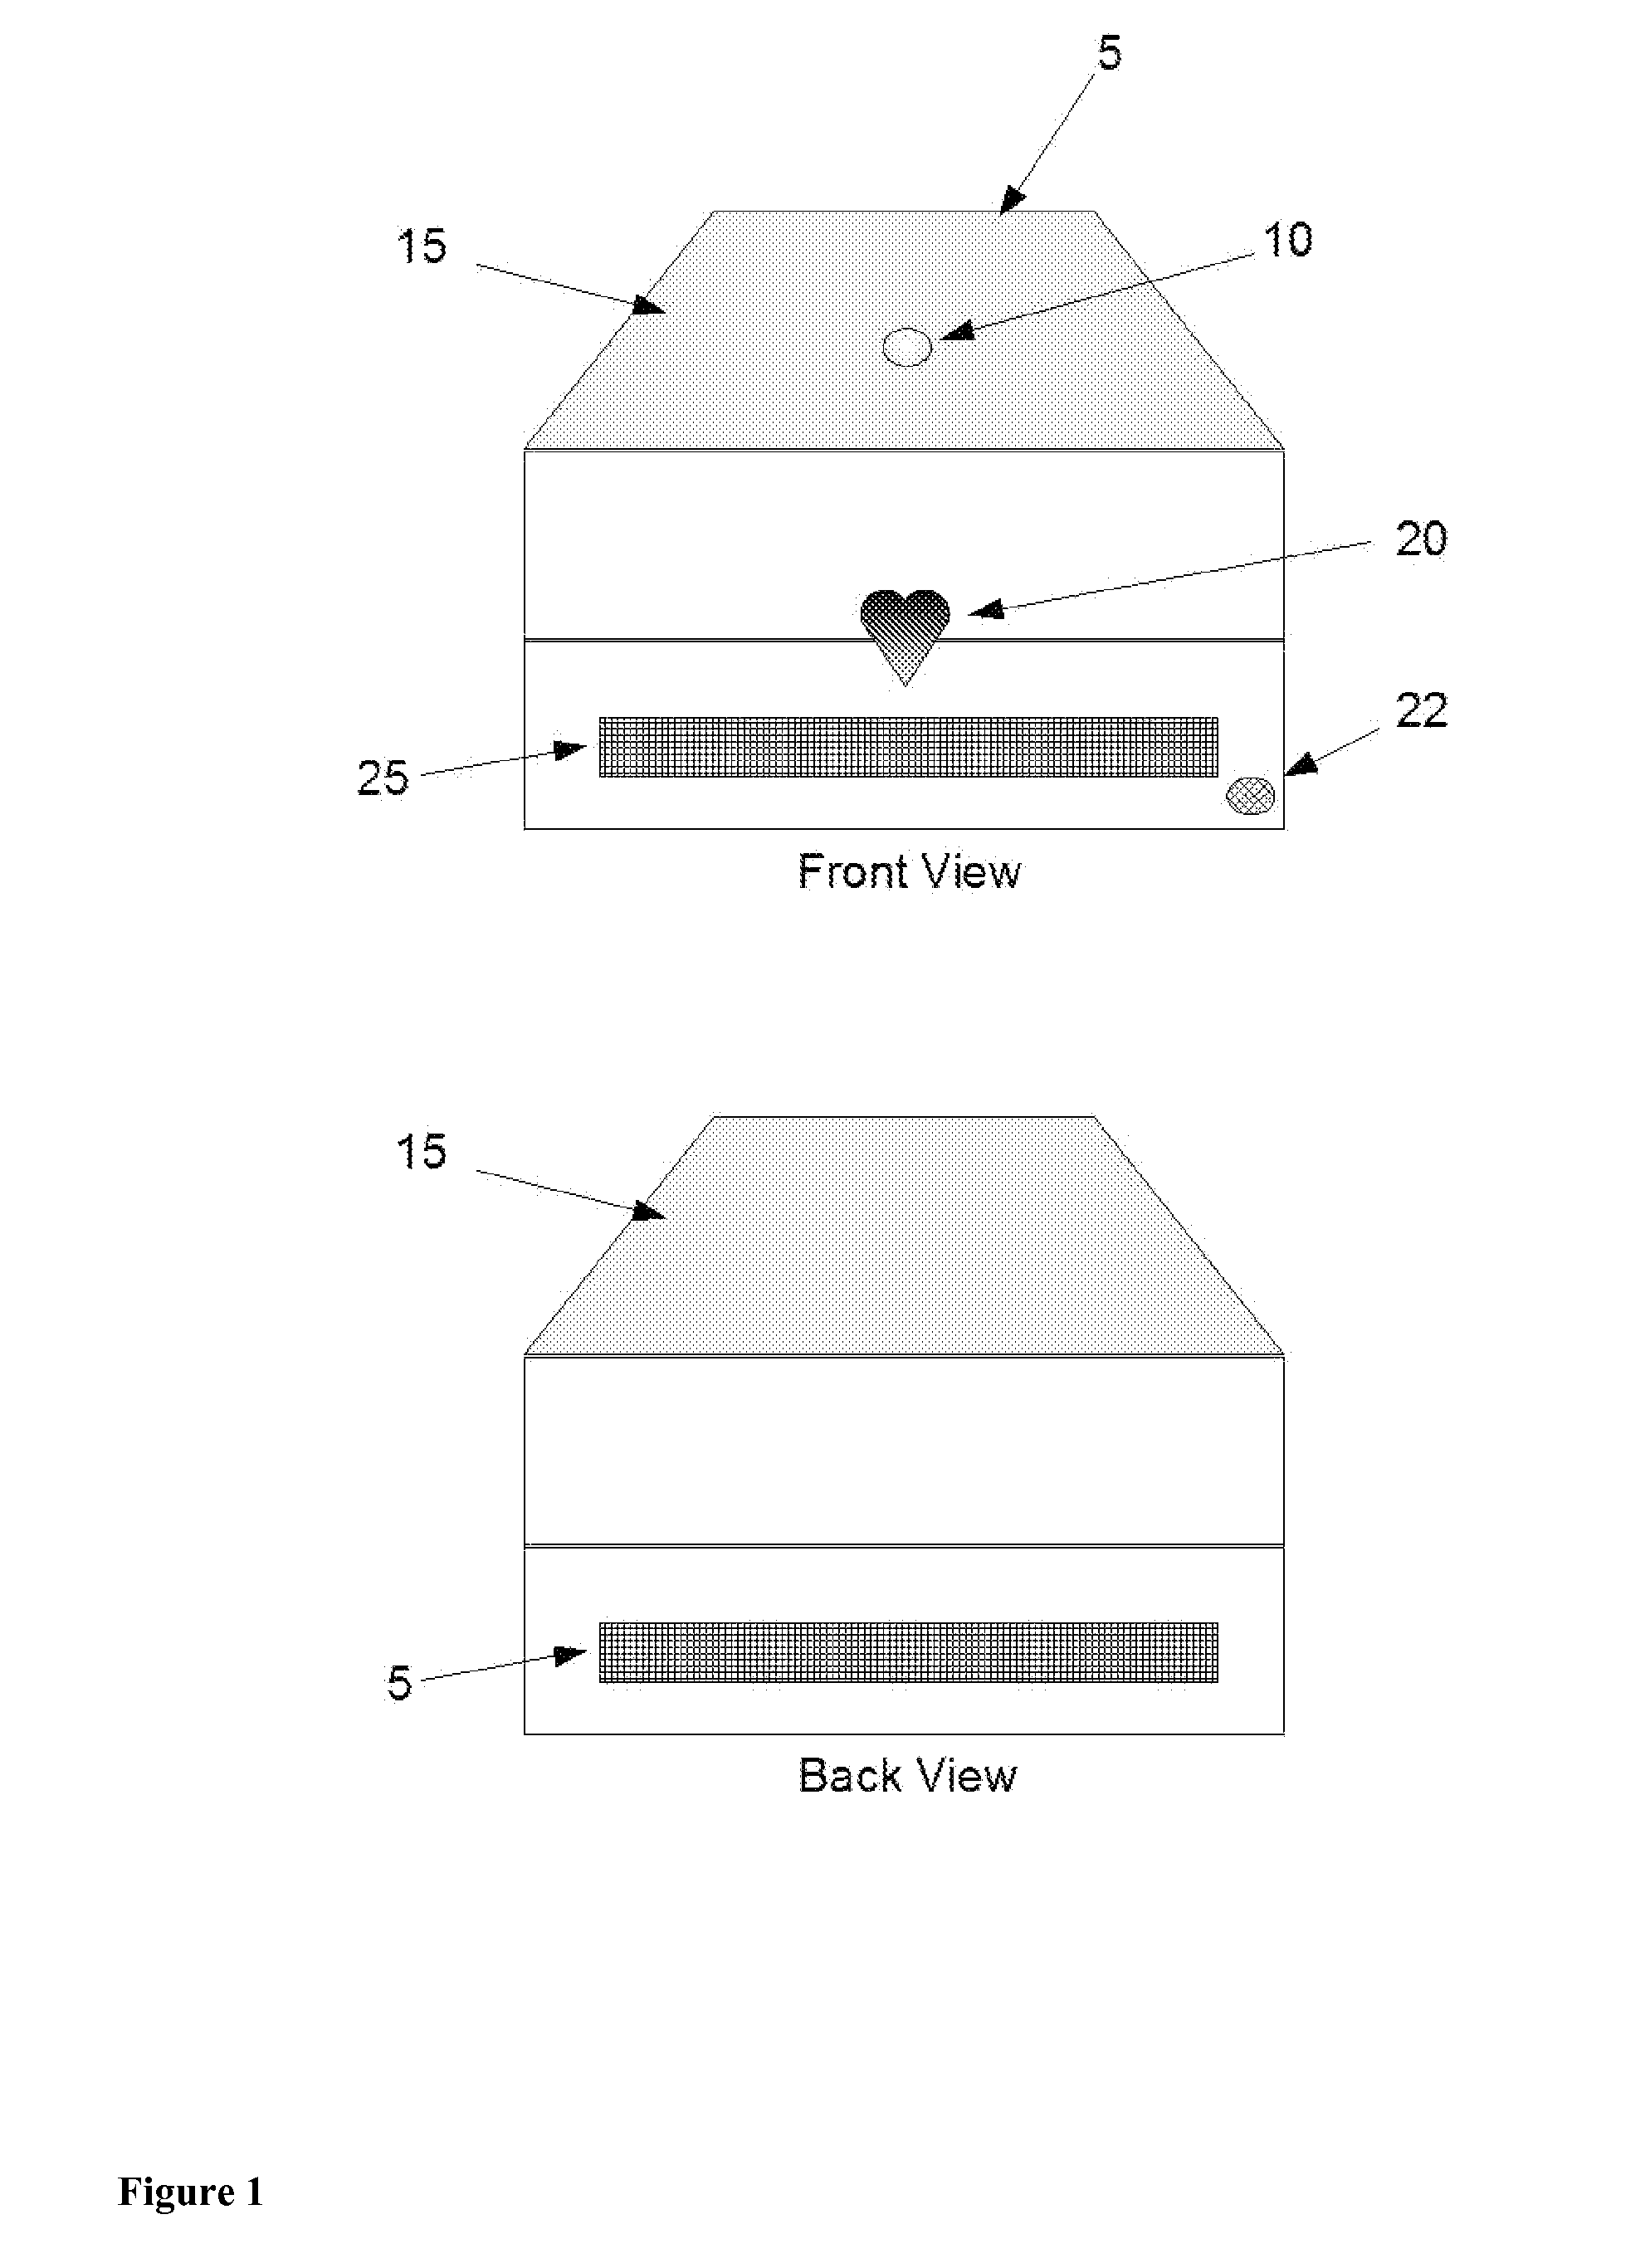 Event-Recording Gift Container and Methods of Use